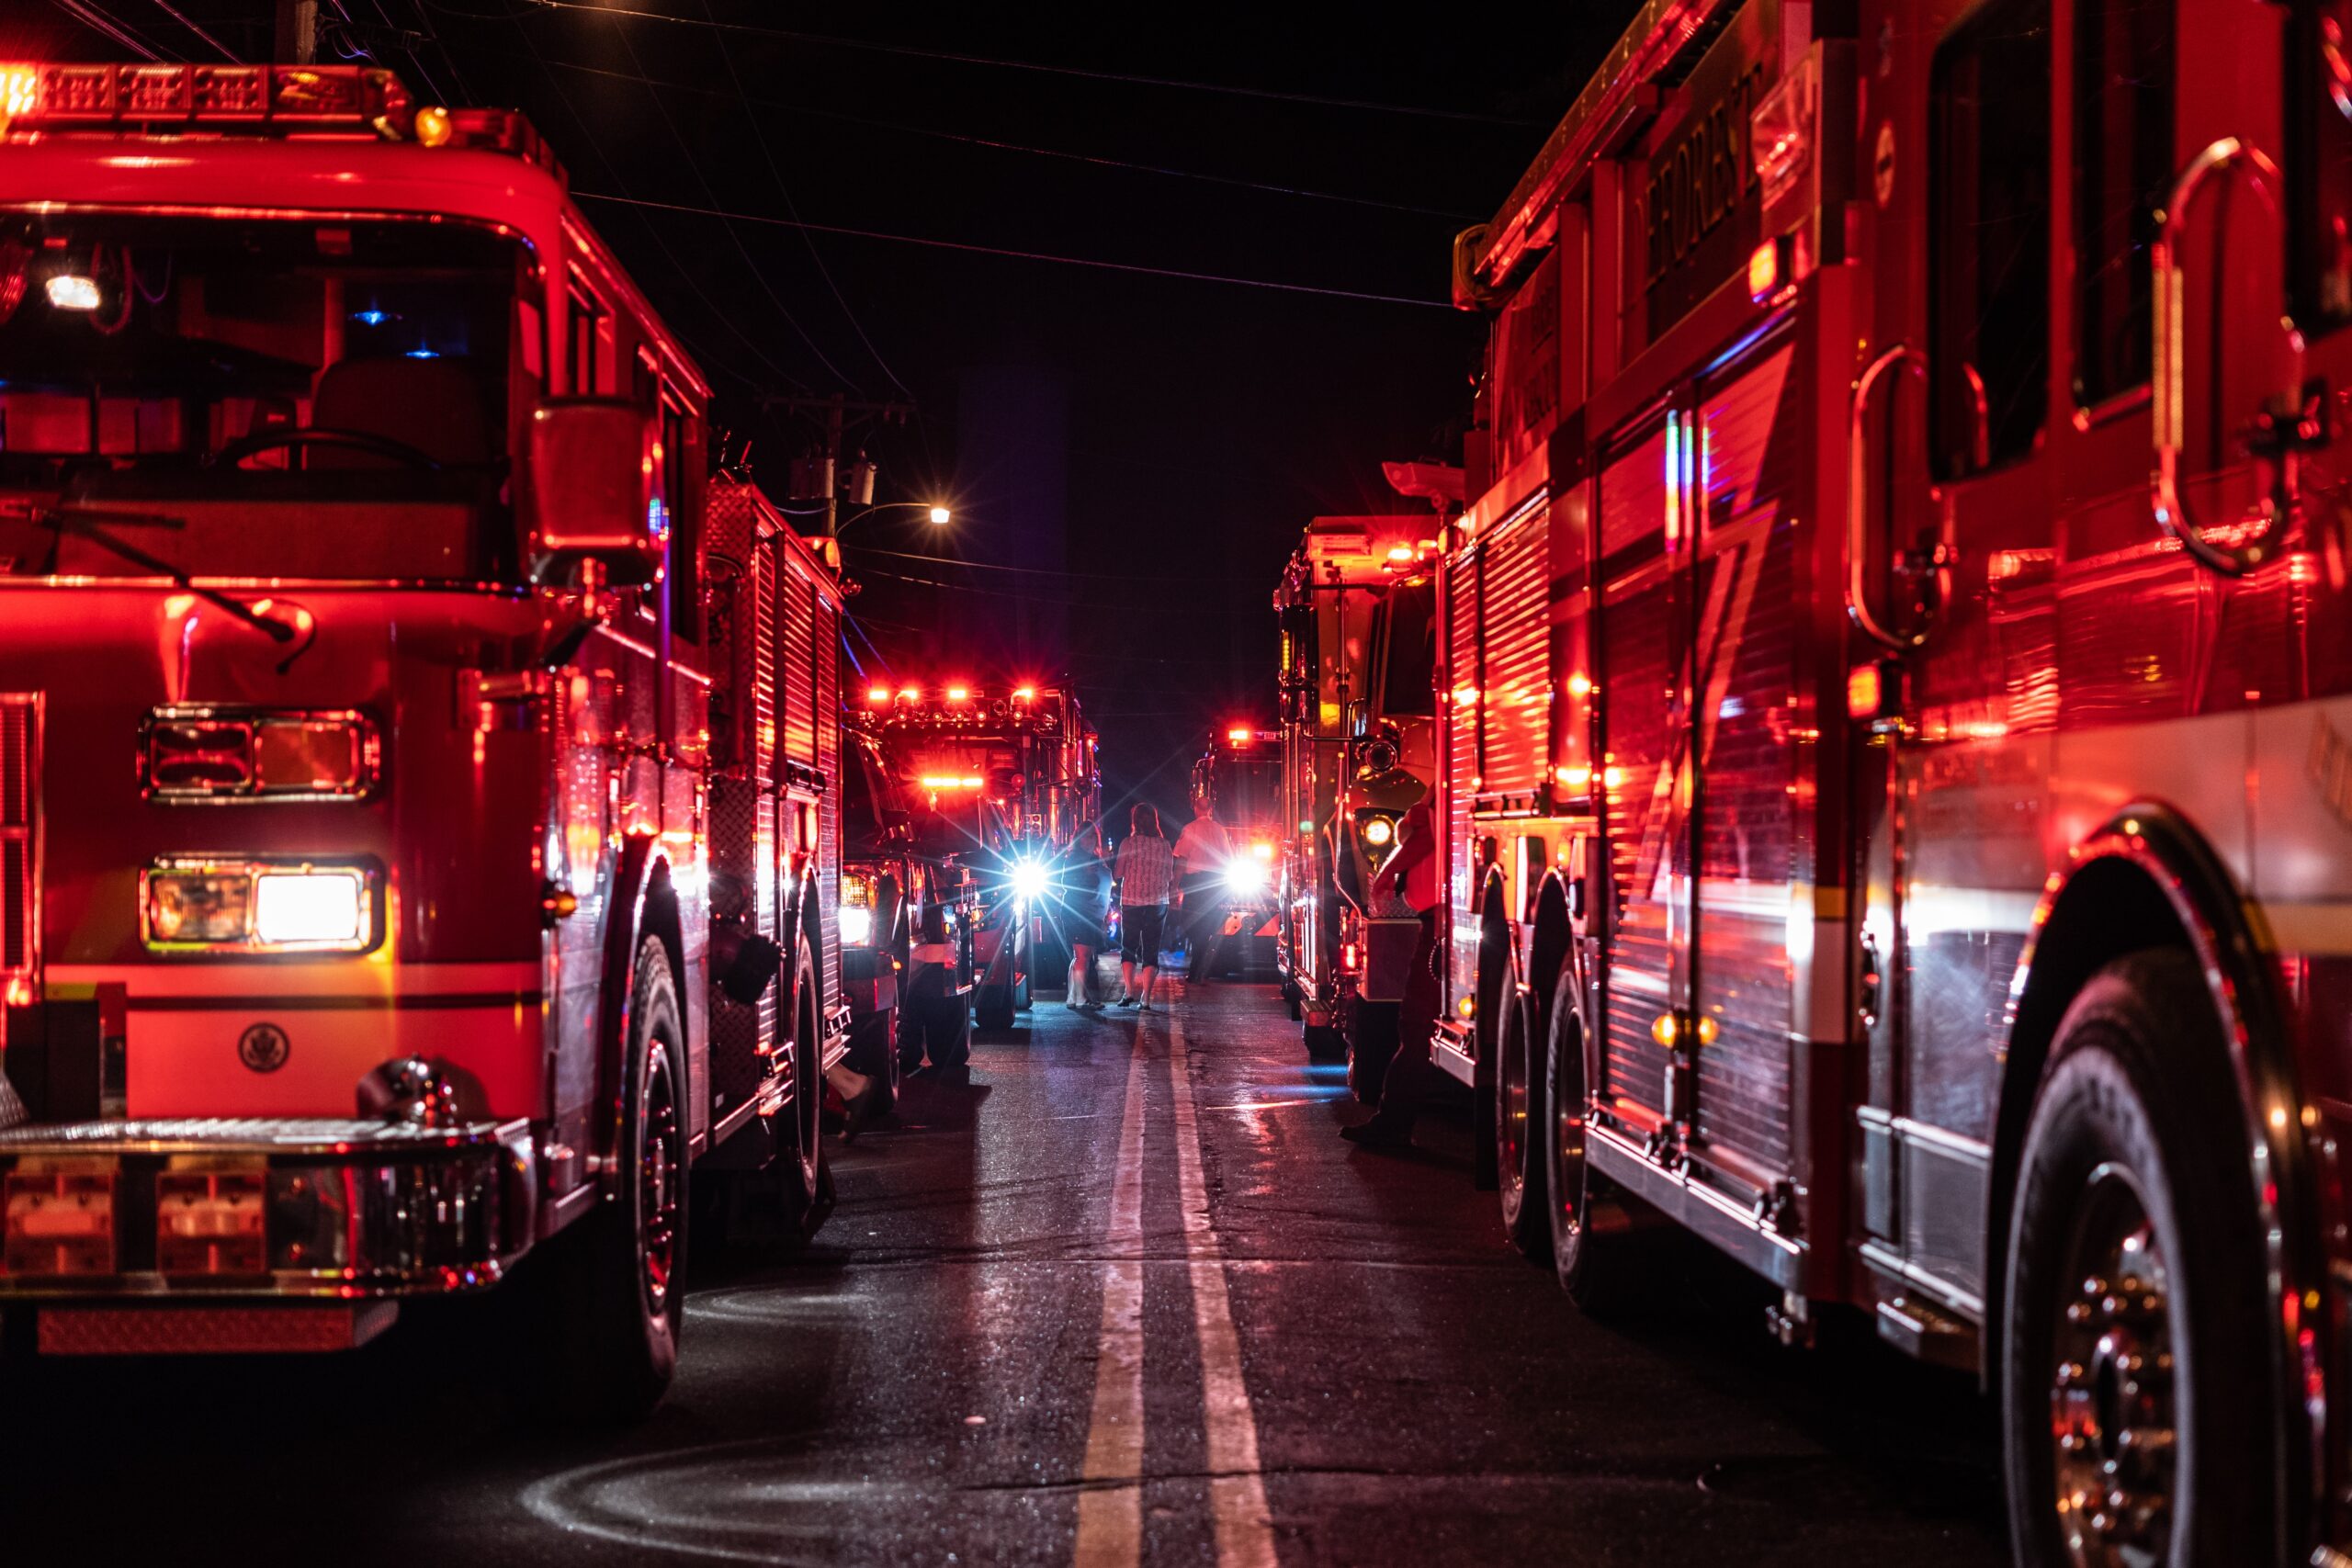 Image of multiple fire trucks at an emergency event.